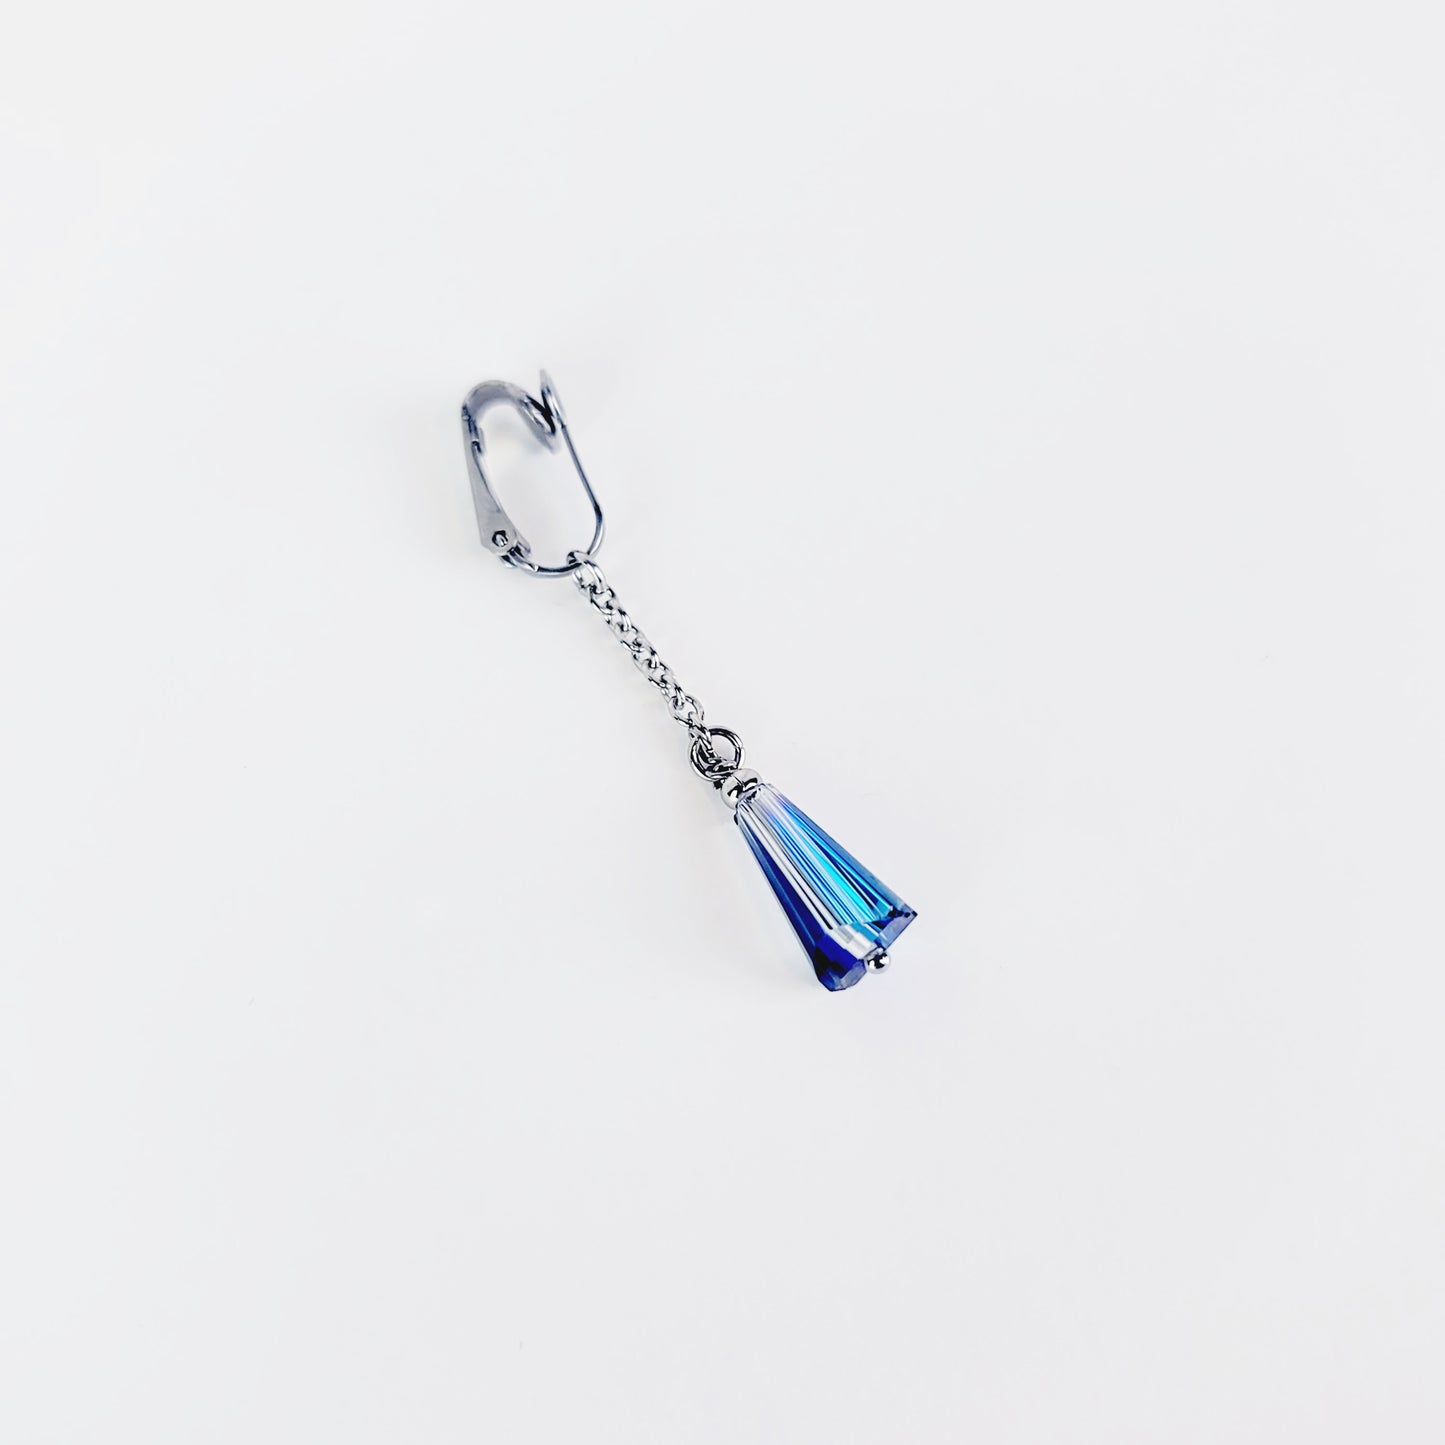 Intimate Jewelry Clip, Not Pierced. Stainless Steel Non-Piercing VCH Clip with Crystal Dangle.